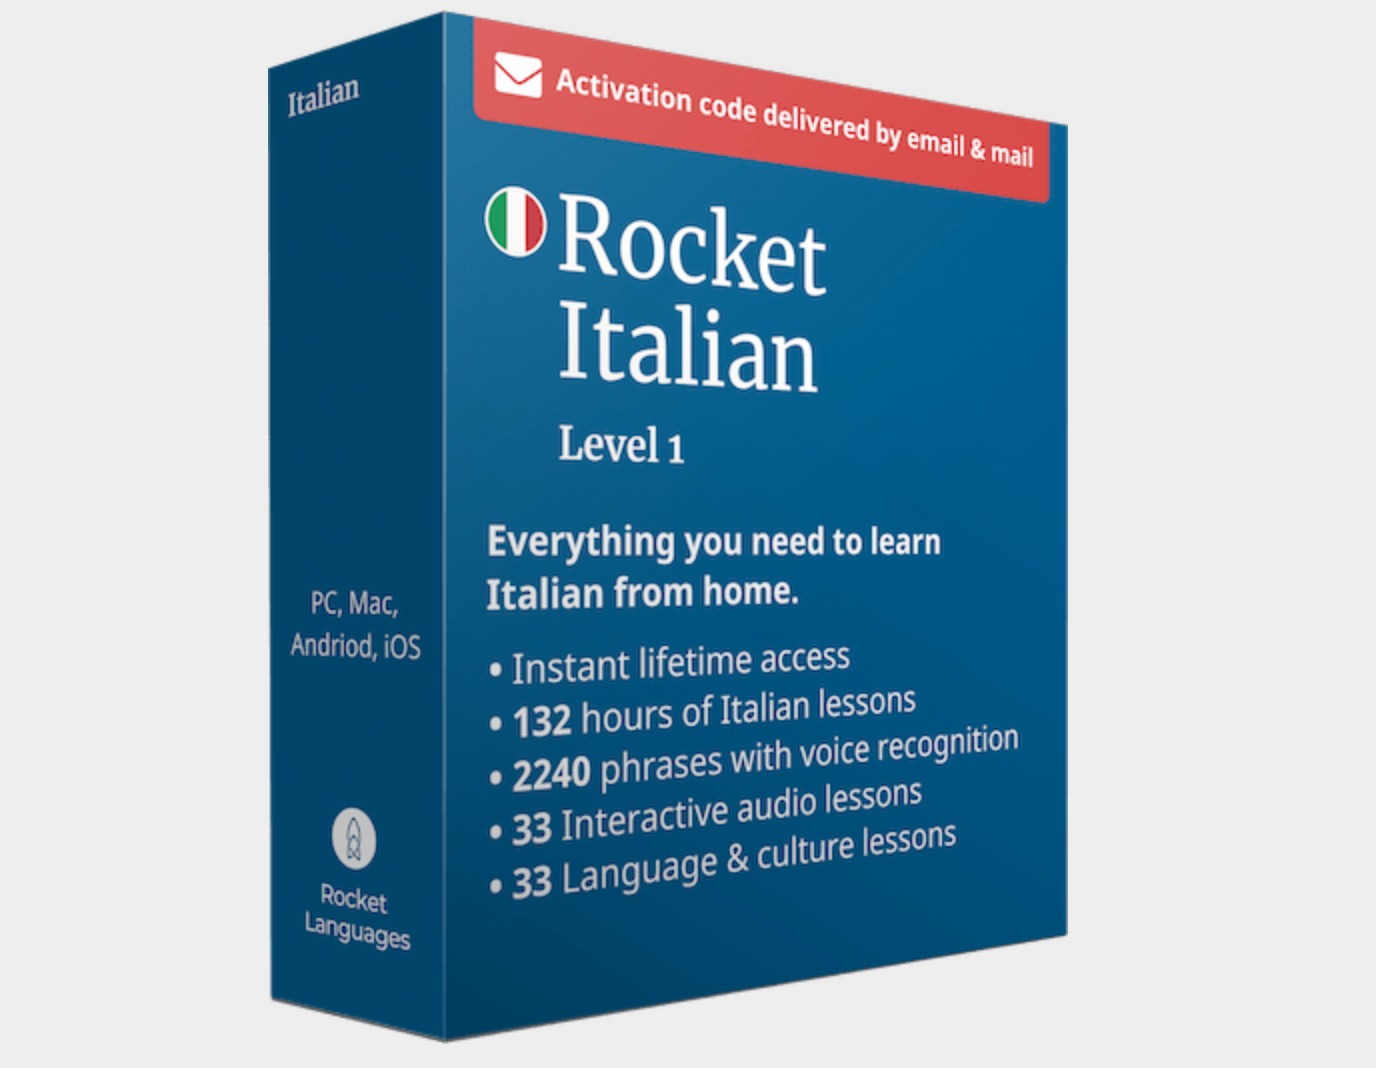 Learning Italian with a self-paced online course (Rocket Languages Review)